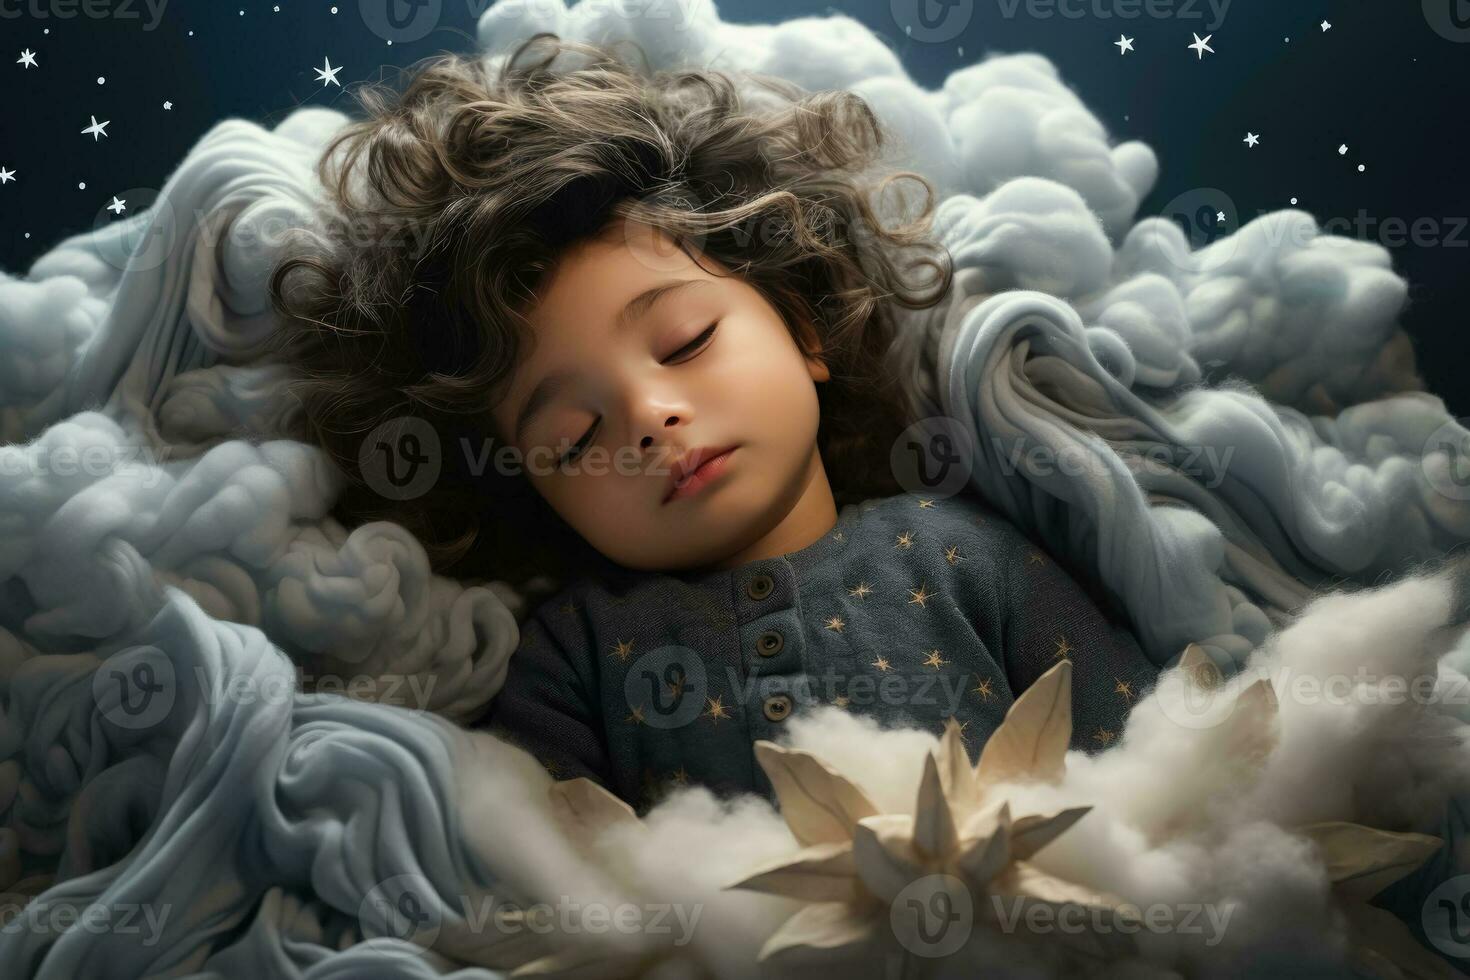 Babies napping on clouds enveloped in magic and whimsical dreamscapes photo